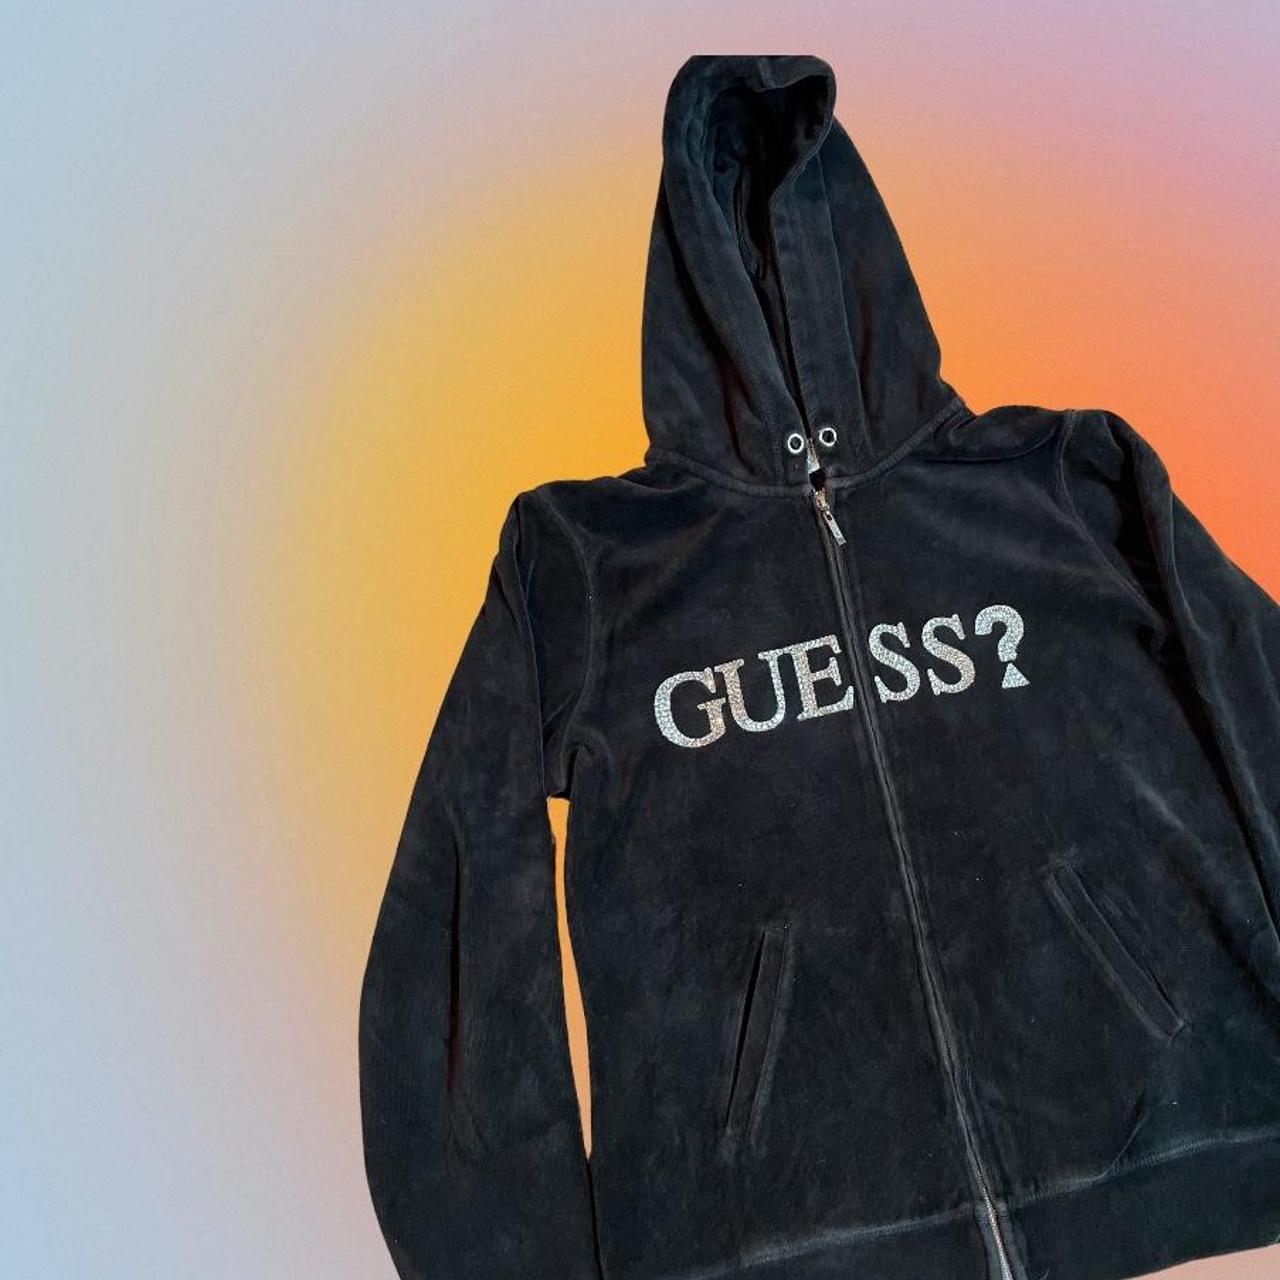 Guess Women's Black and Silver Hoodie (2)